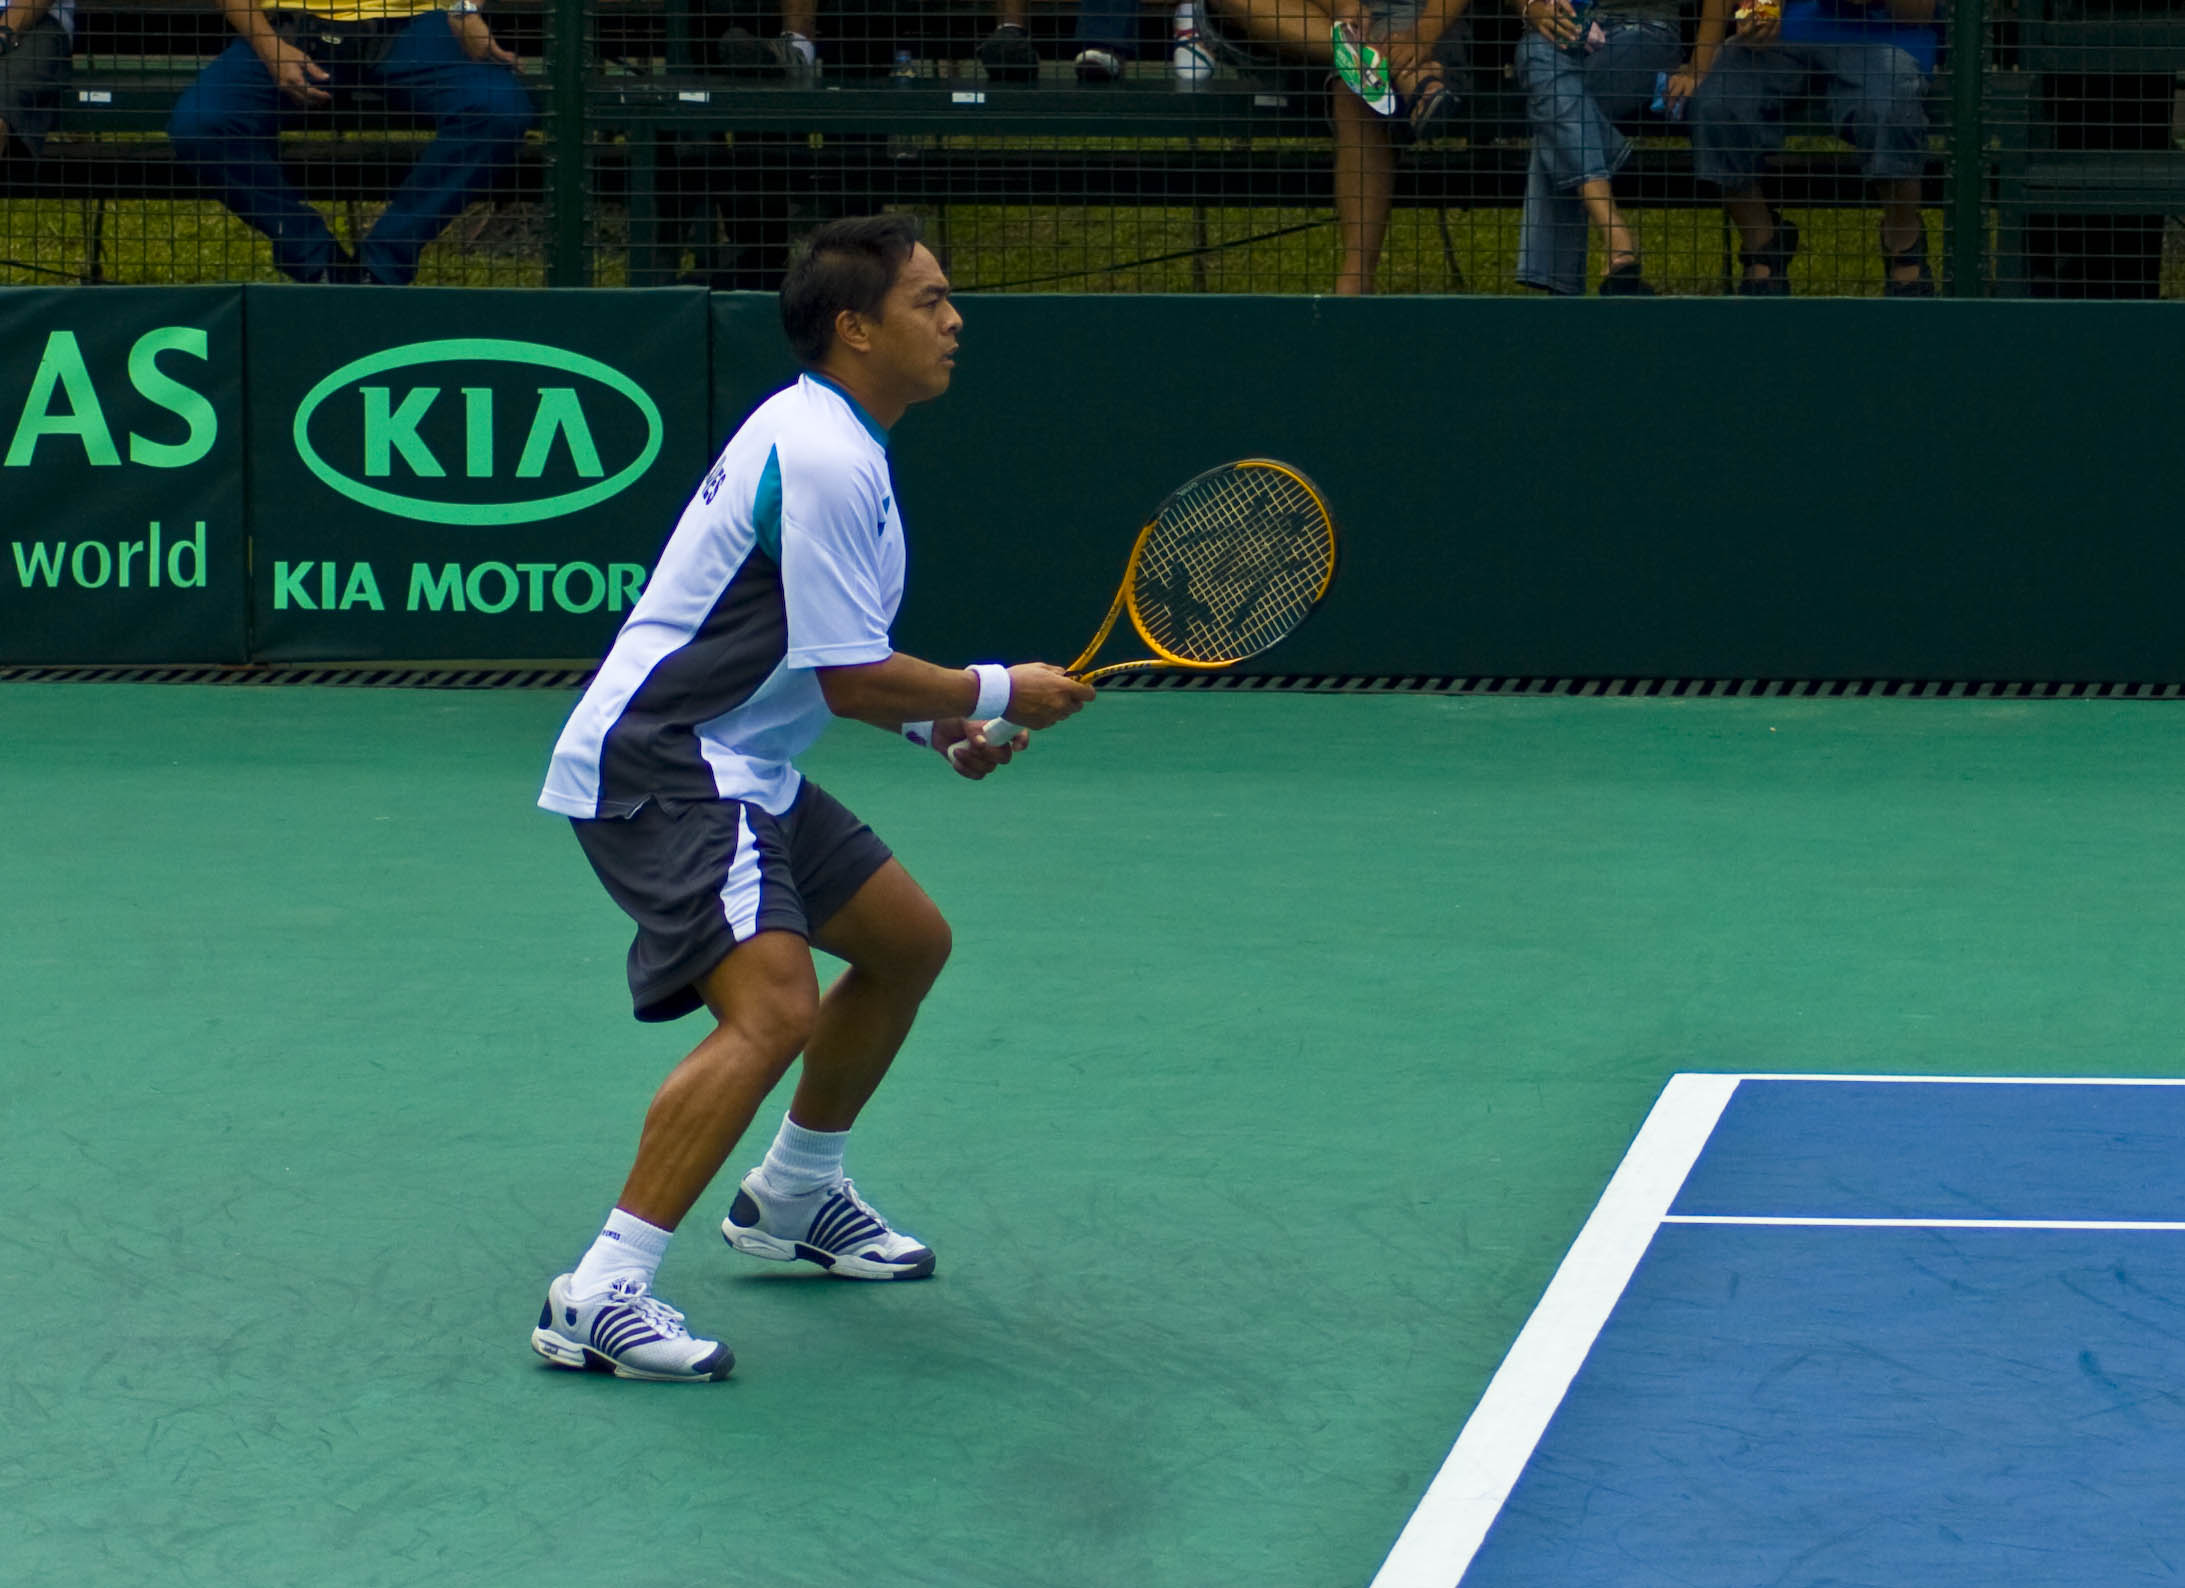 tennis player on court preparing to swing at ball